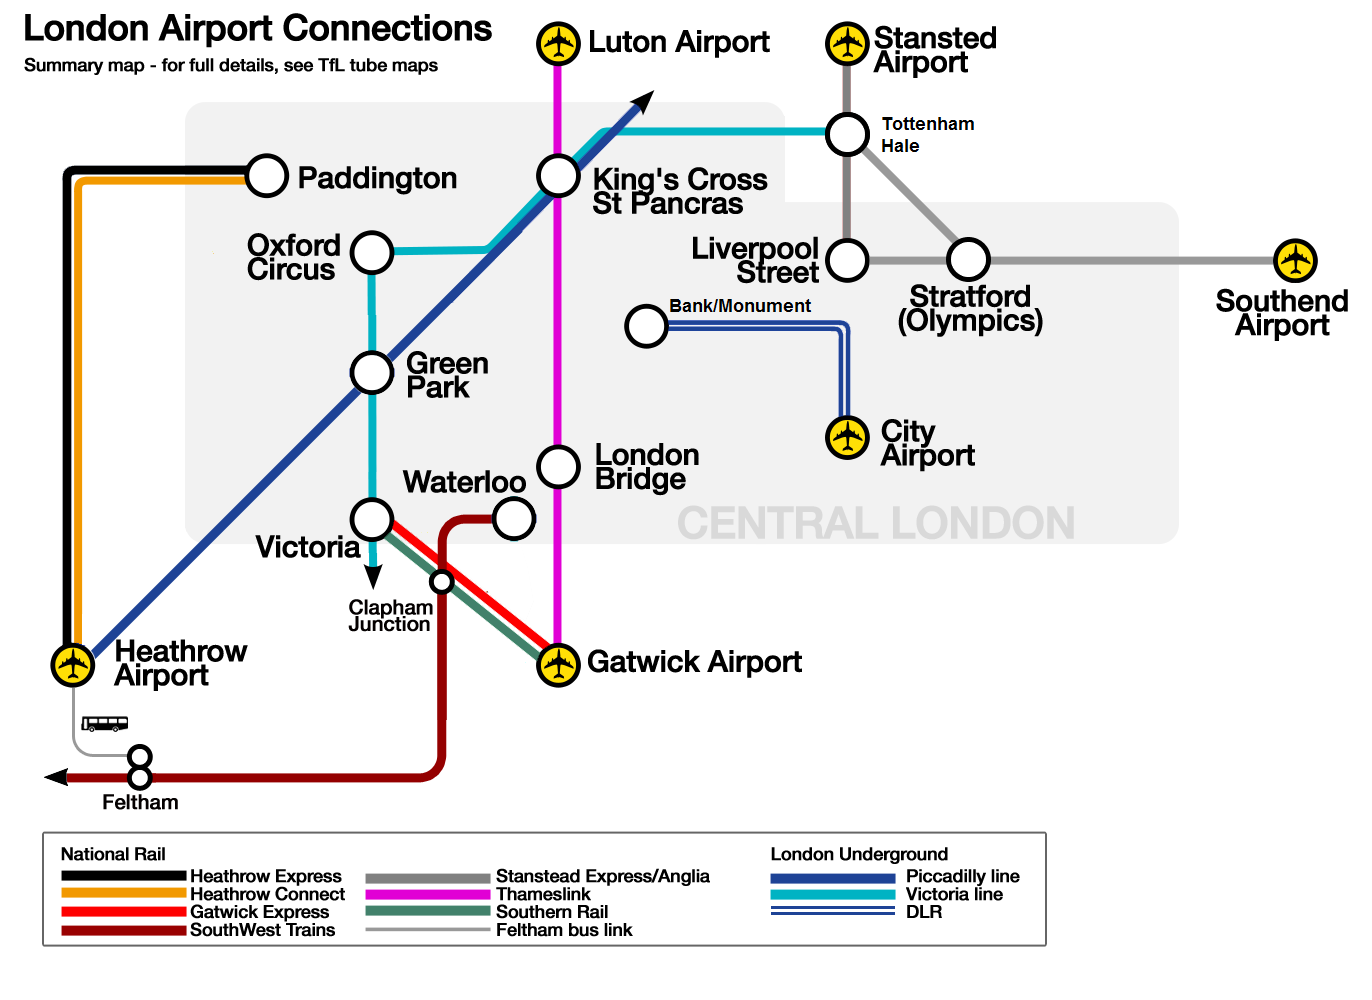 "London airport links map" by Cnbrb - Own work. Licensed under CC BY-SA 3.0 via Wikimedia Commons.